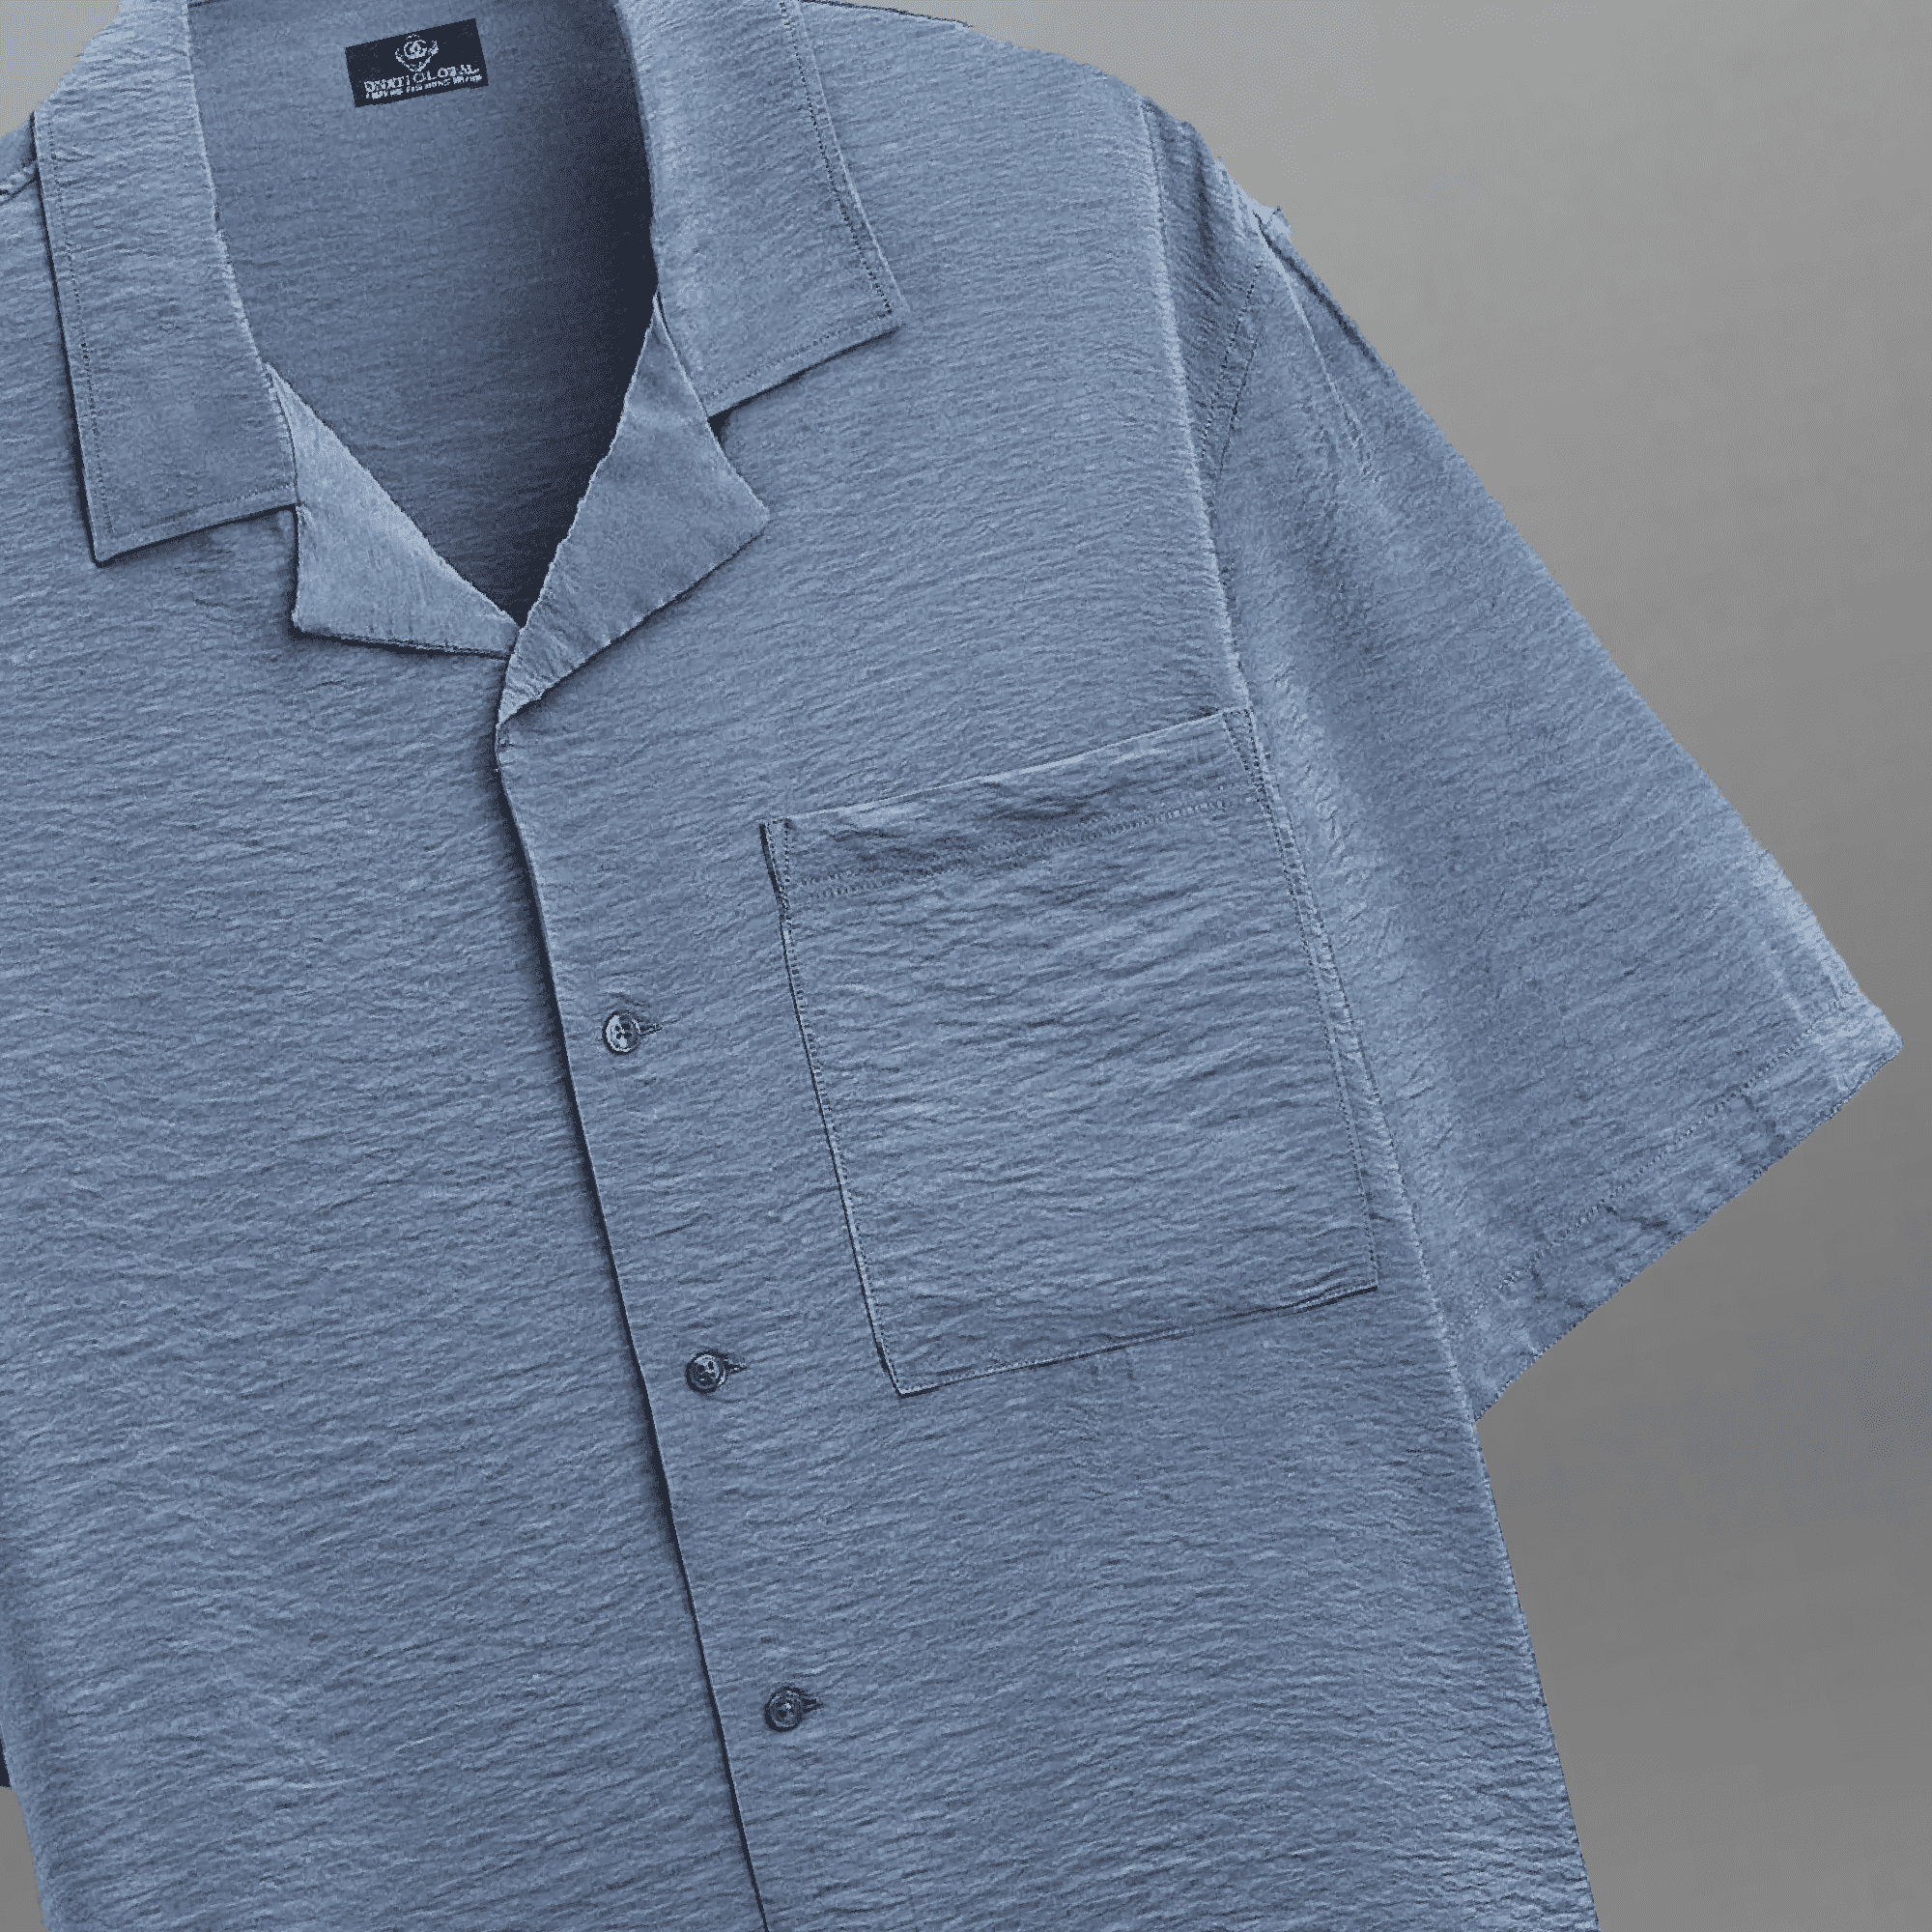 Men's Blue Textured Oversized Camp Collar Shirt with a Pocket-RMS044